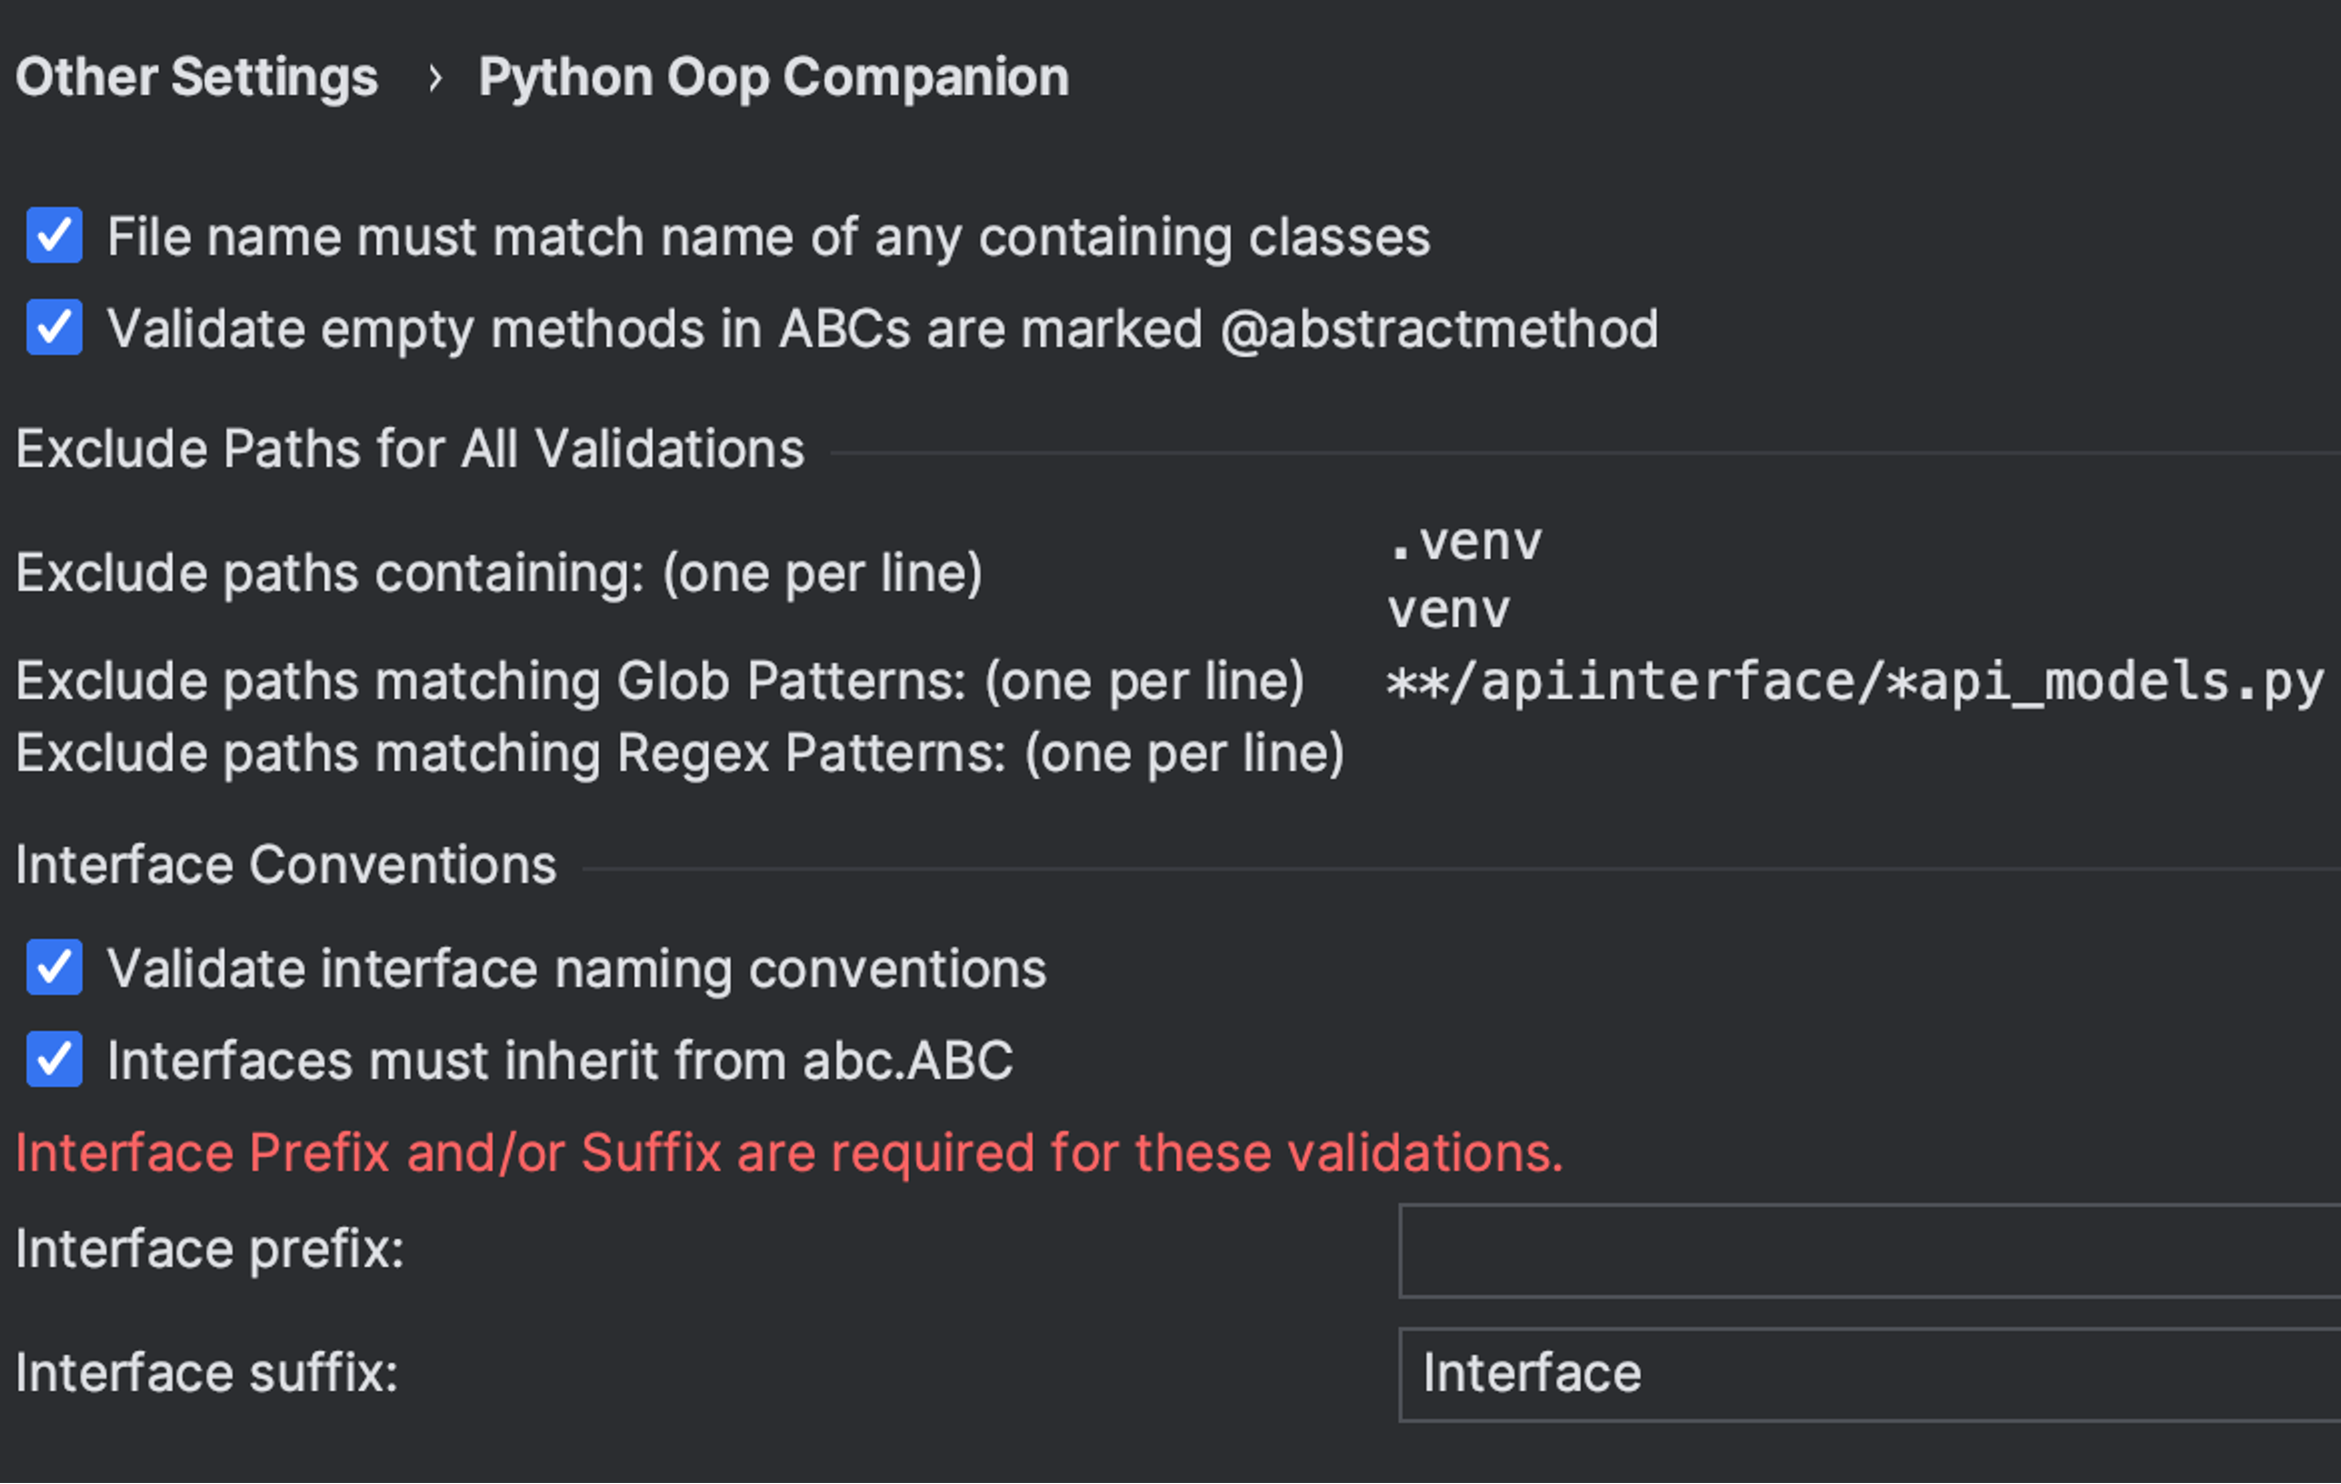 Available settings for Python OOP Companion. Every inspection can be enabled/disabled individually. They are described in detail below. 